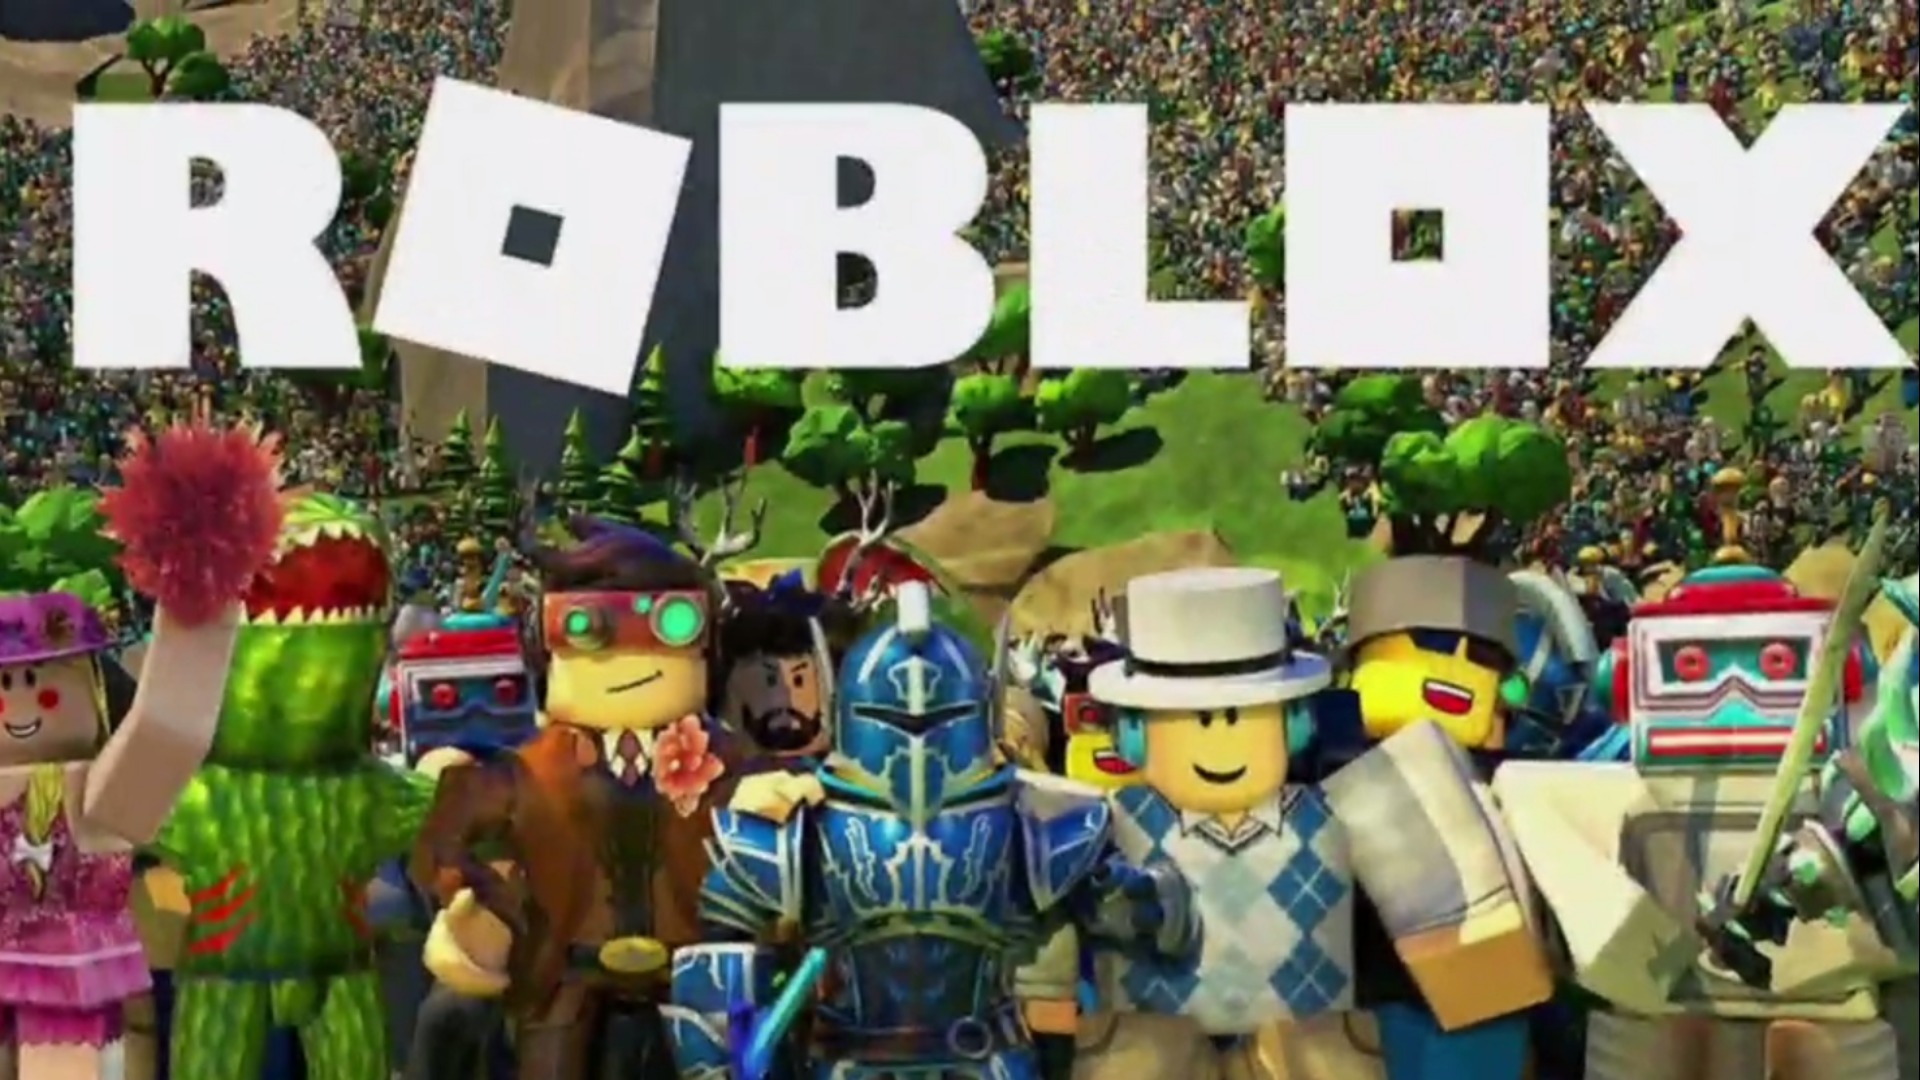 New Questions About Some Inappropriate Content On The Gaming Platform Roblox Video - how do you change your name on roblox for free roblox questions